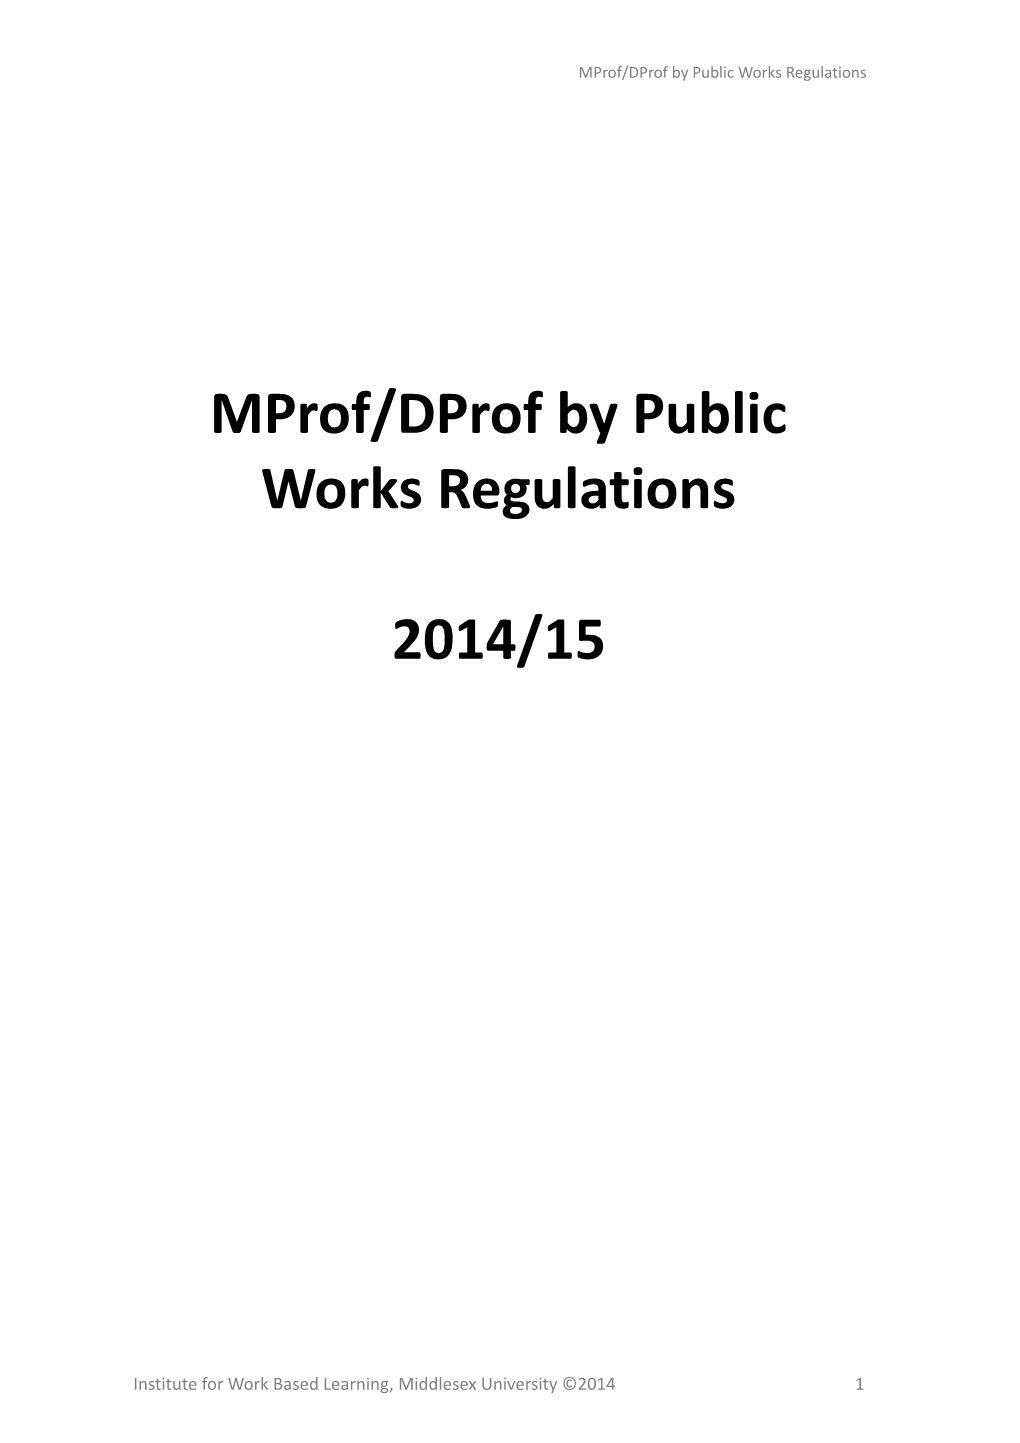 Mprof/Dprof by Public Works Regulations